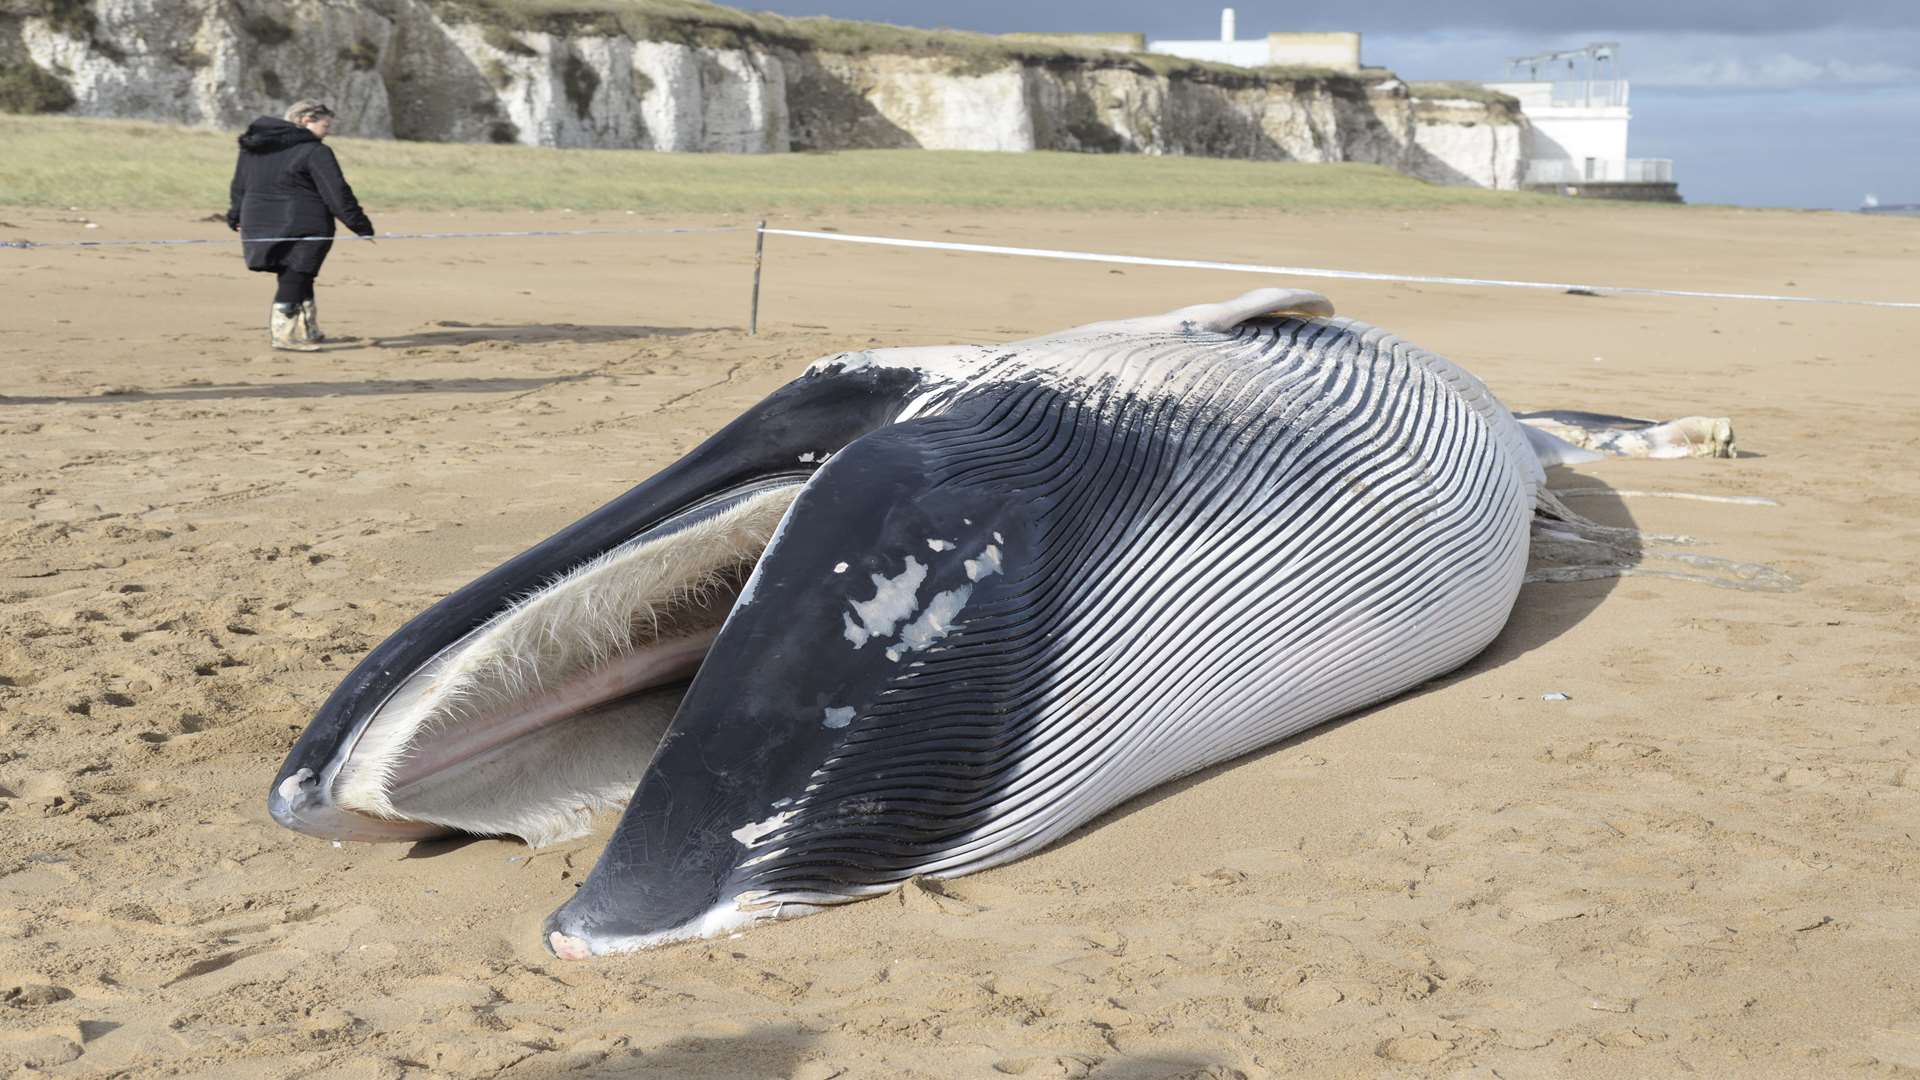 The mammal was found dead on the beach. Picture: Chris Davey.